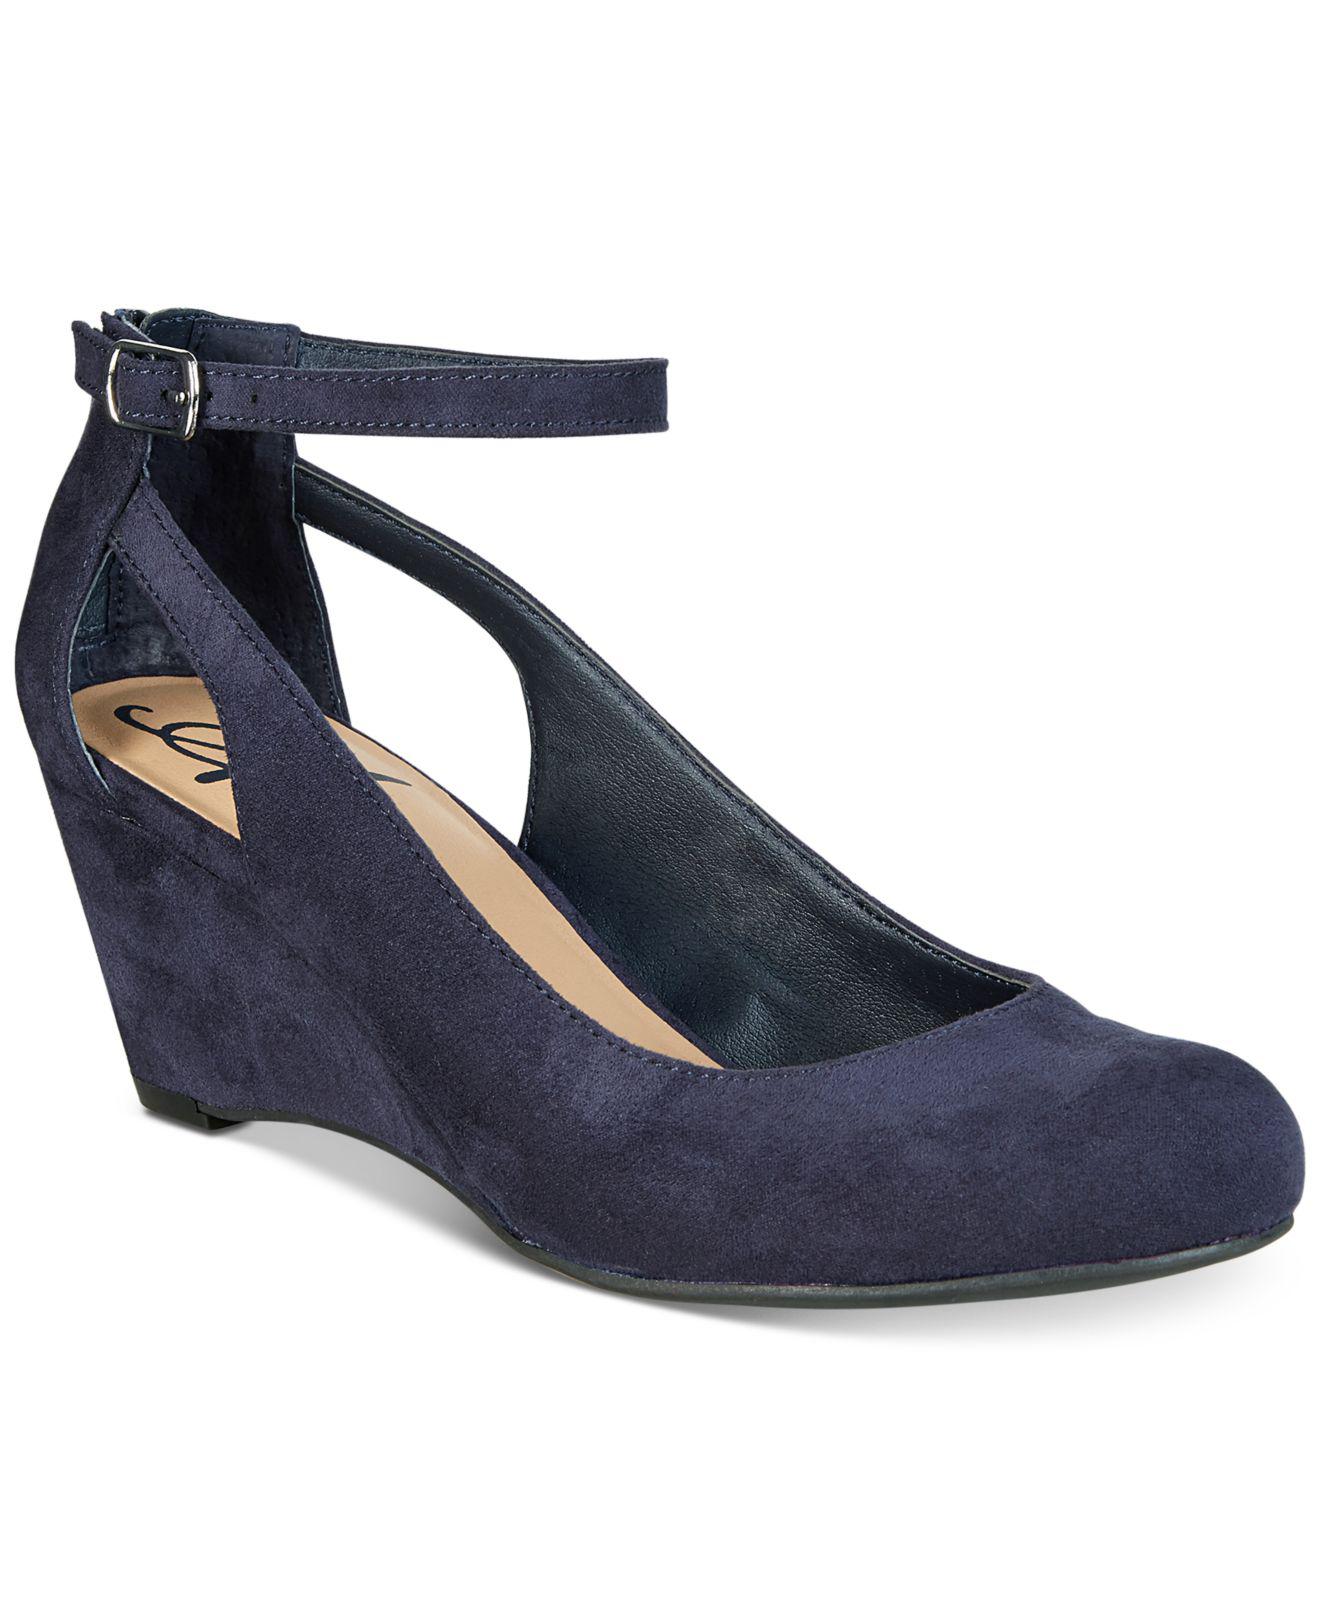 navy pumps with ankle strap